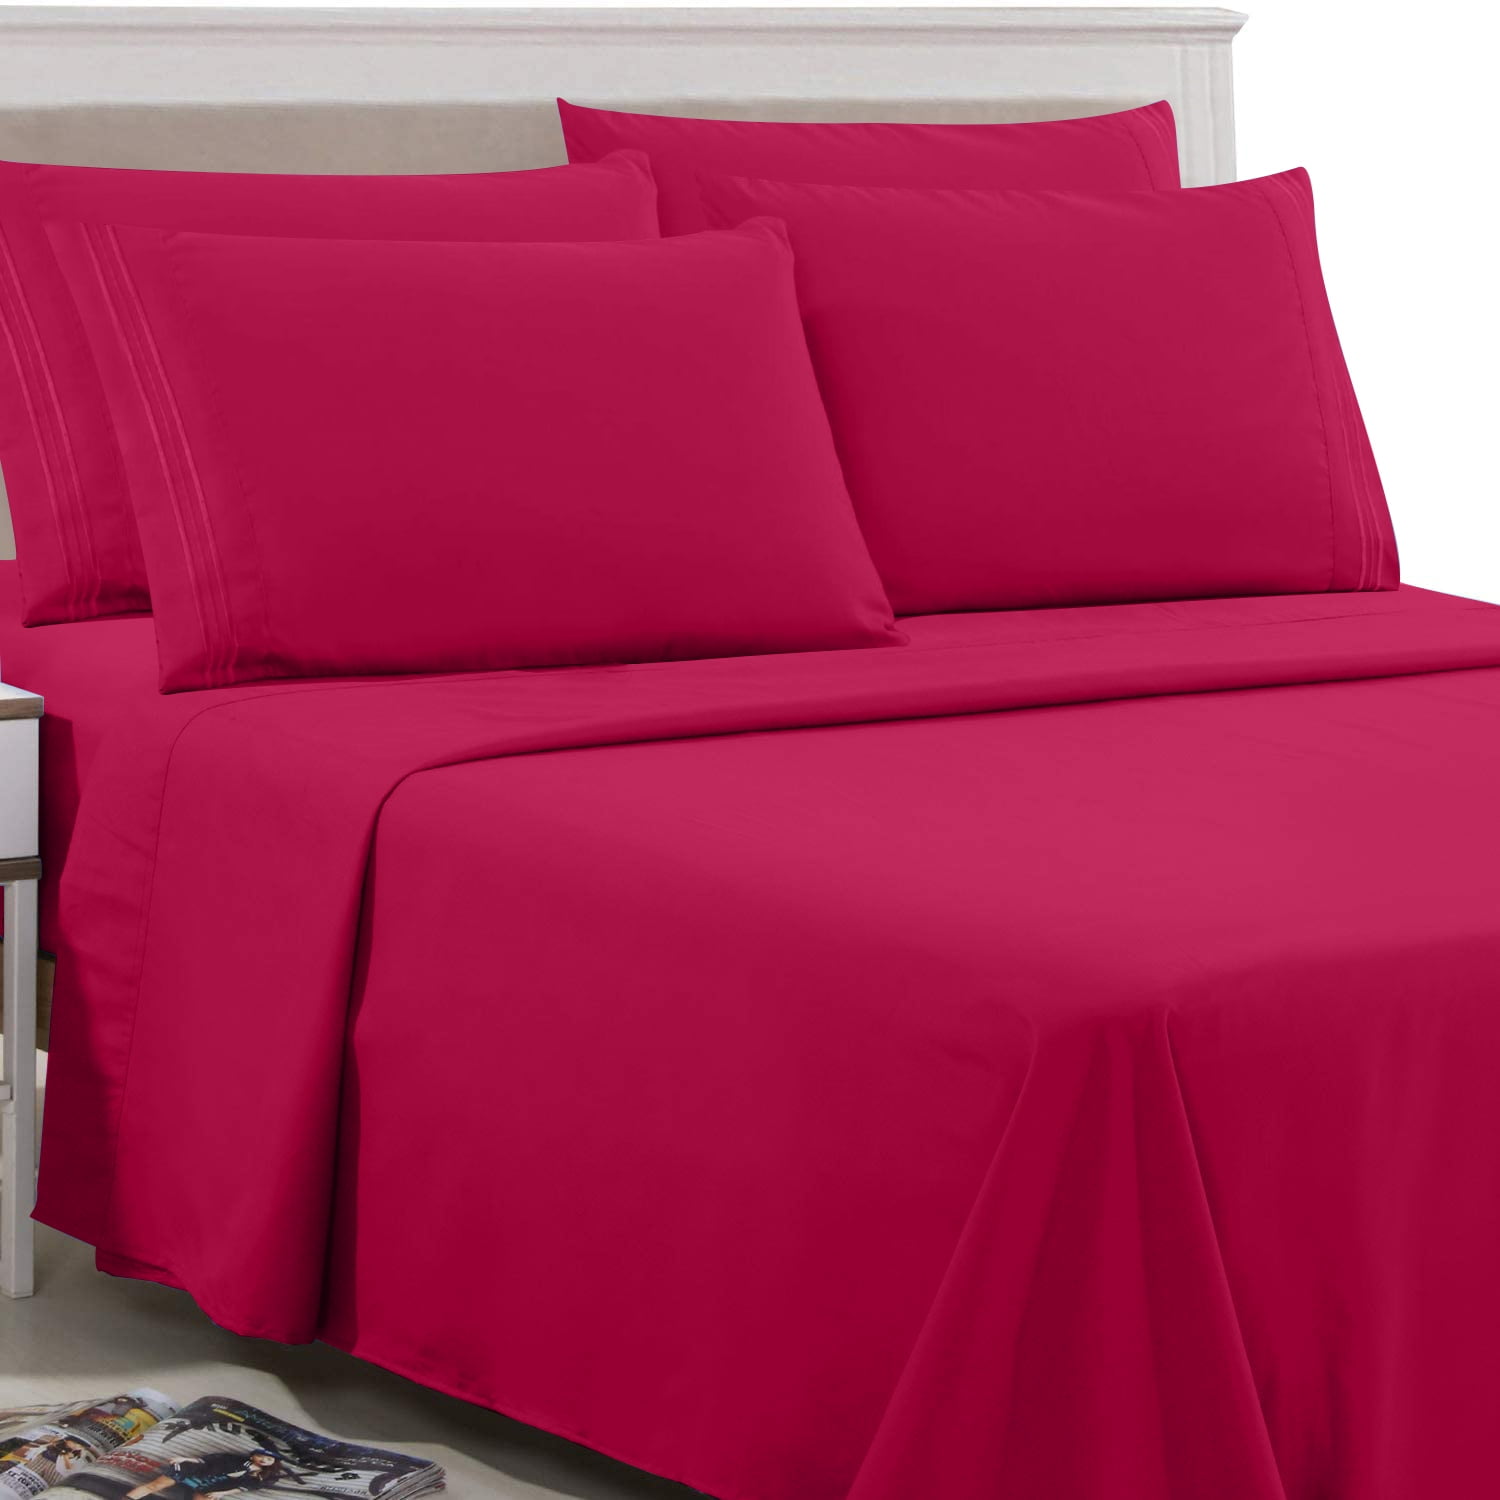 Details about  / Lux Decor Collection Bedsheet Set Brushed Microfiber 1800 Thread Count Bedding